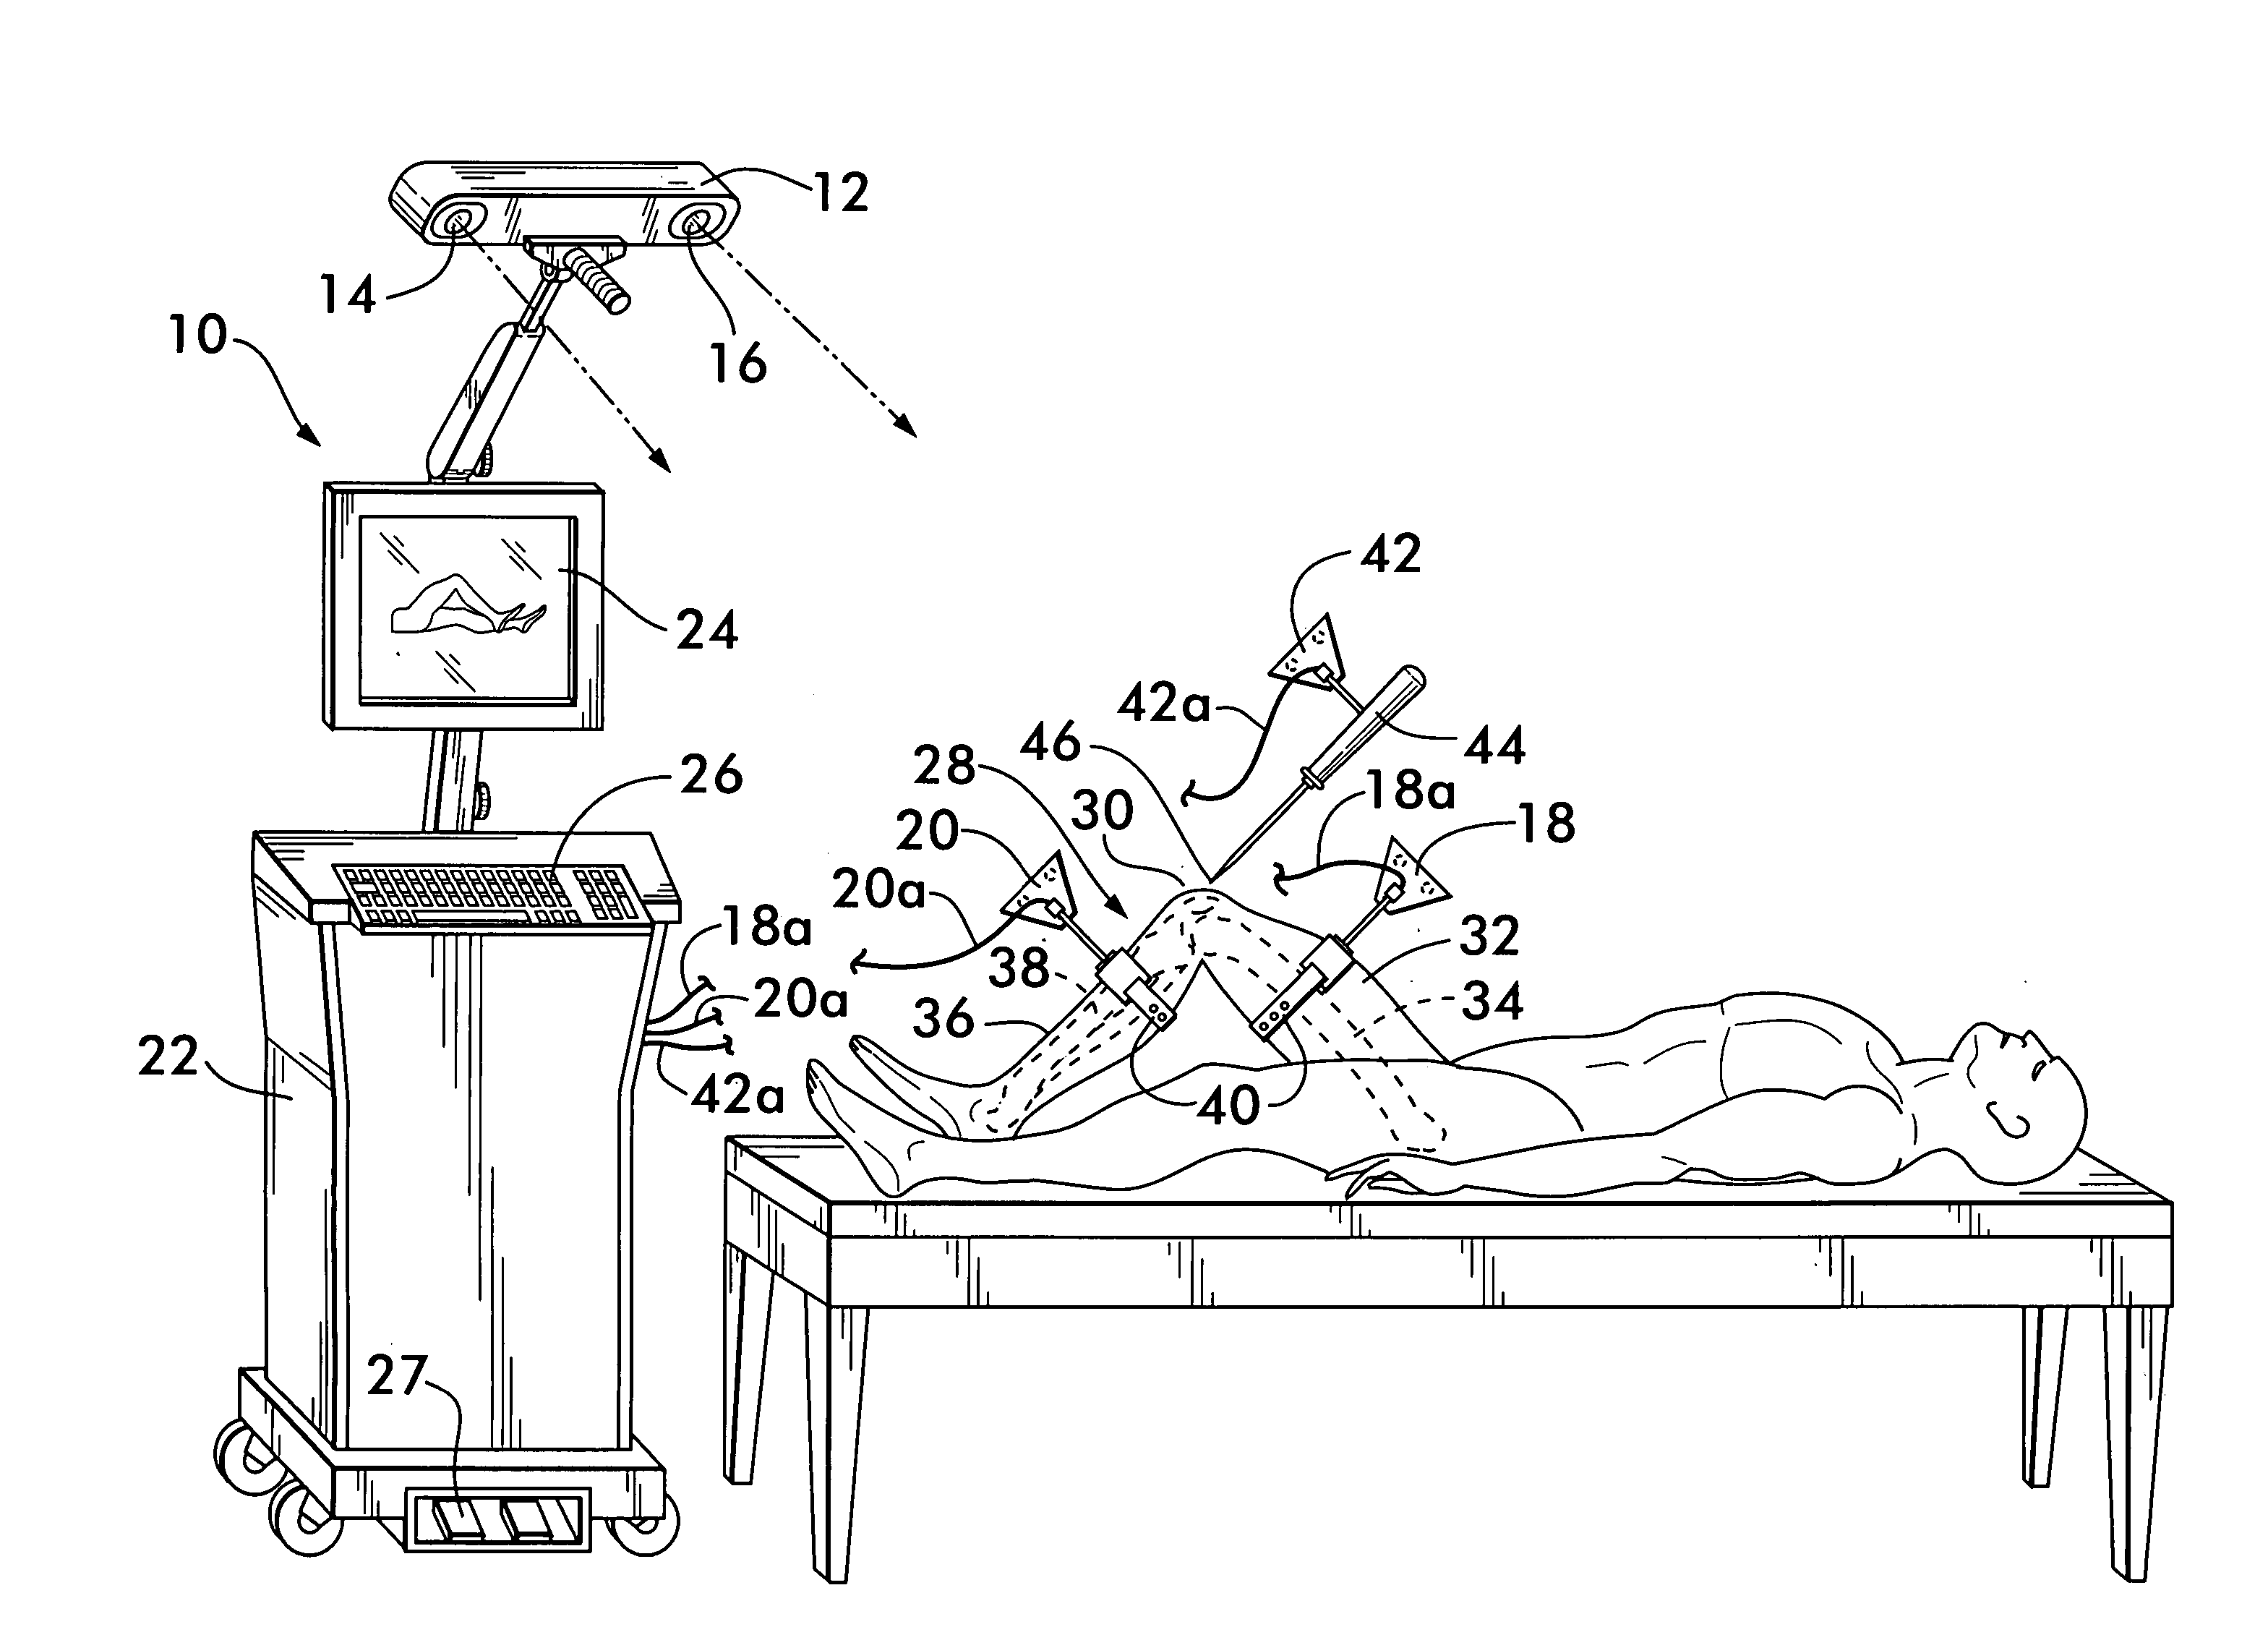 Method of determining the position of the articular point of a joint